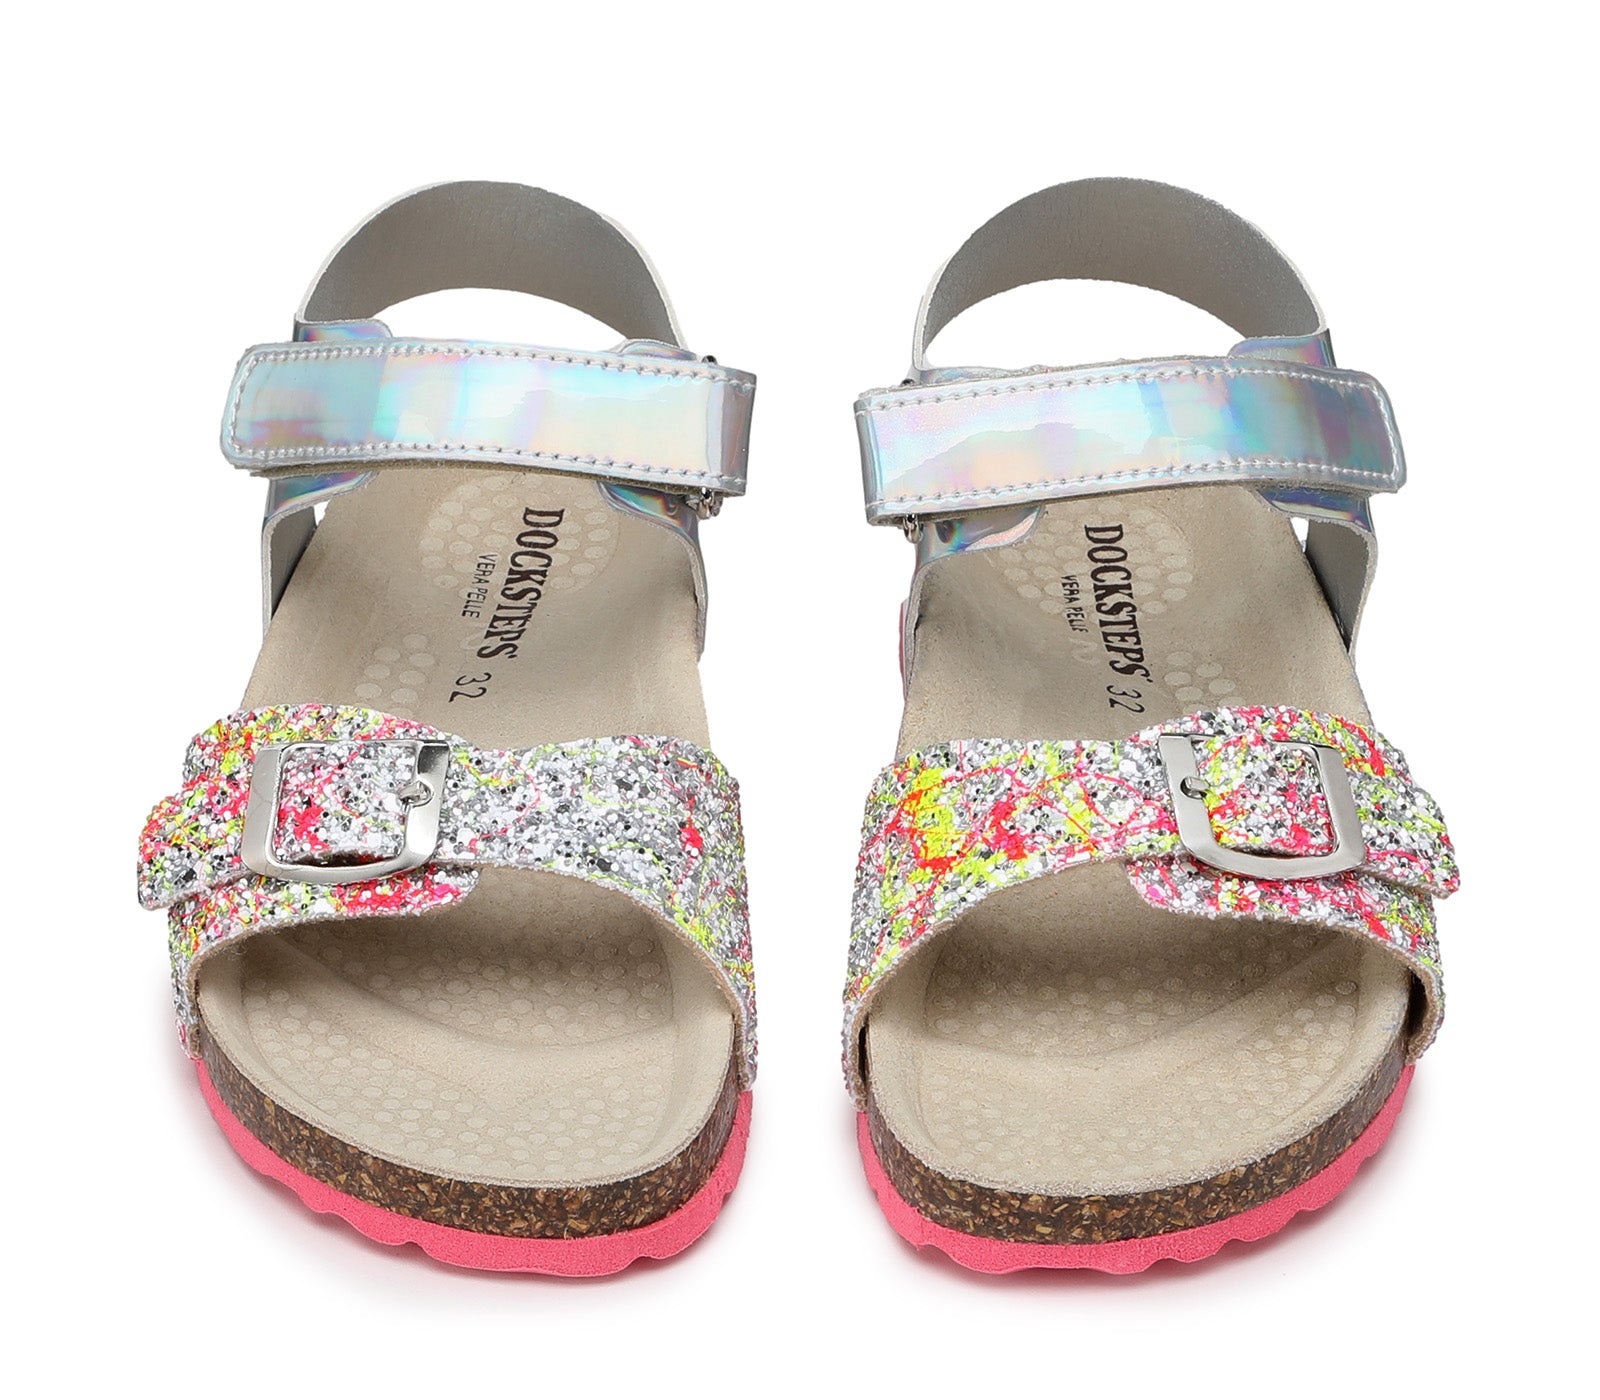 Children's Multicolor Glitter Sandals with Velcro Closure and Pink Sole